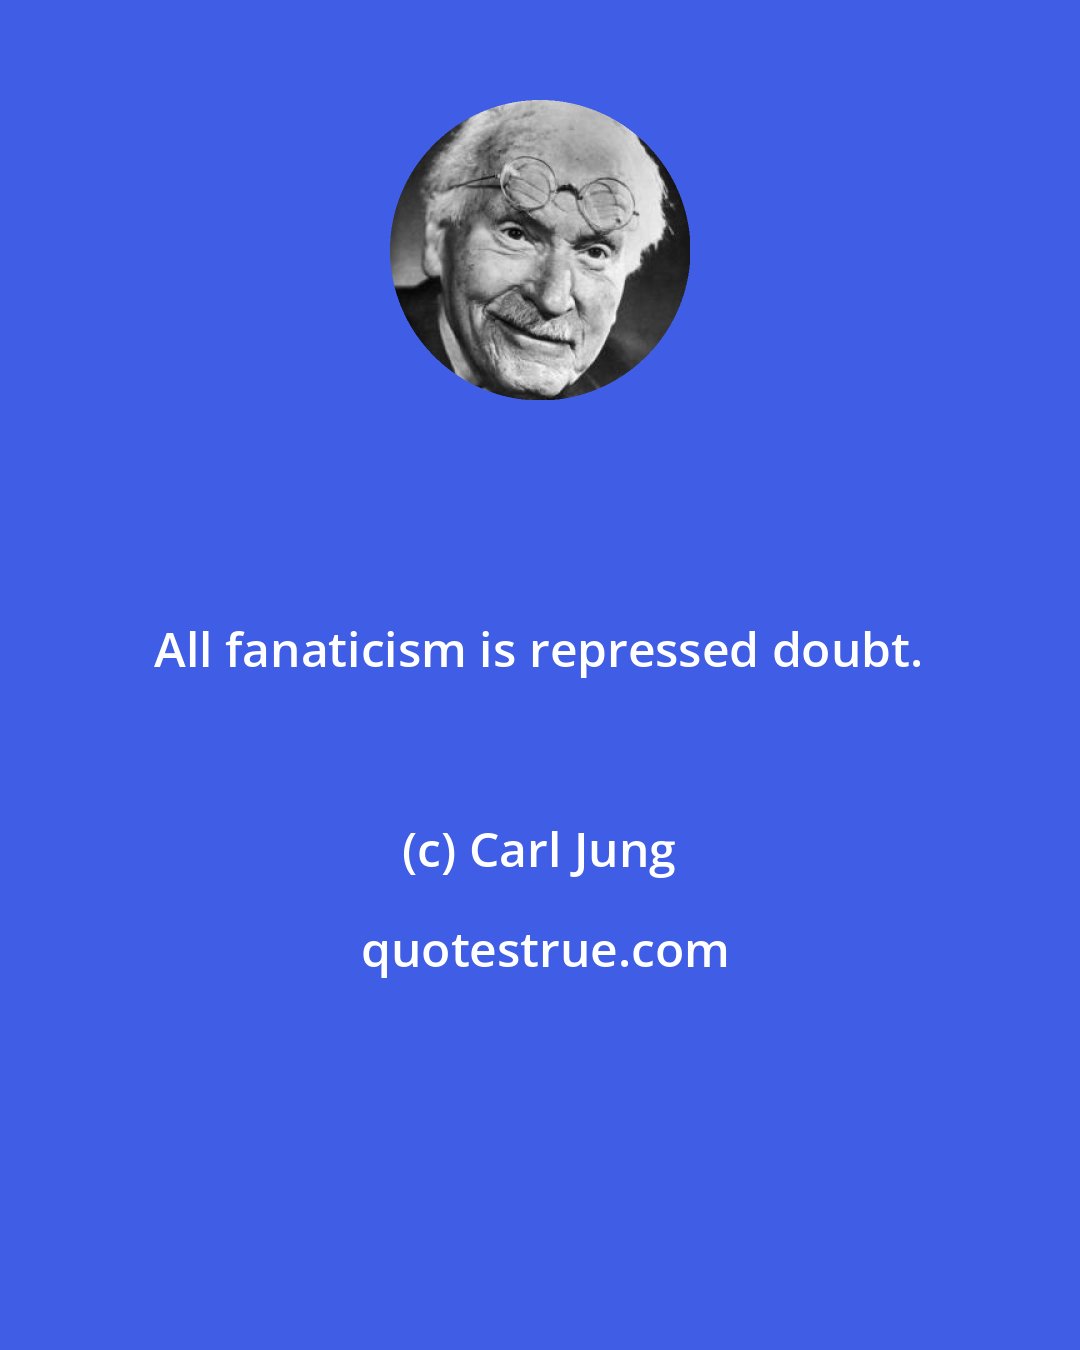 Carl Jung: All fanaticism is repressed doubt.